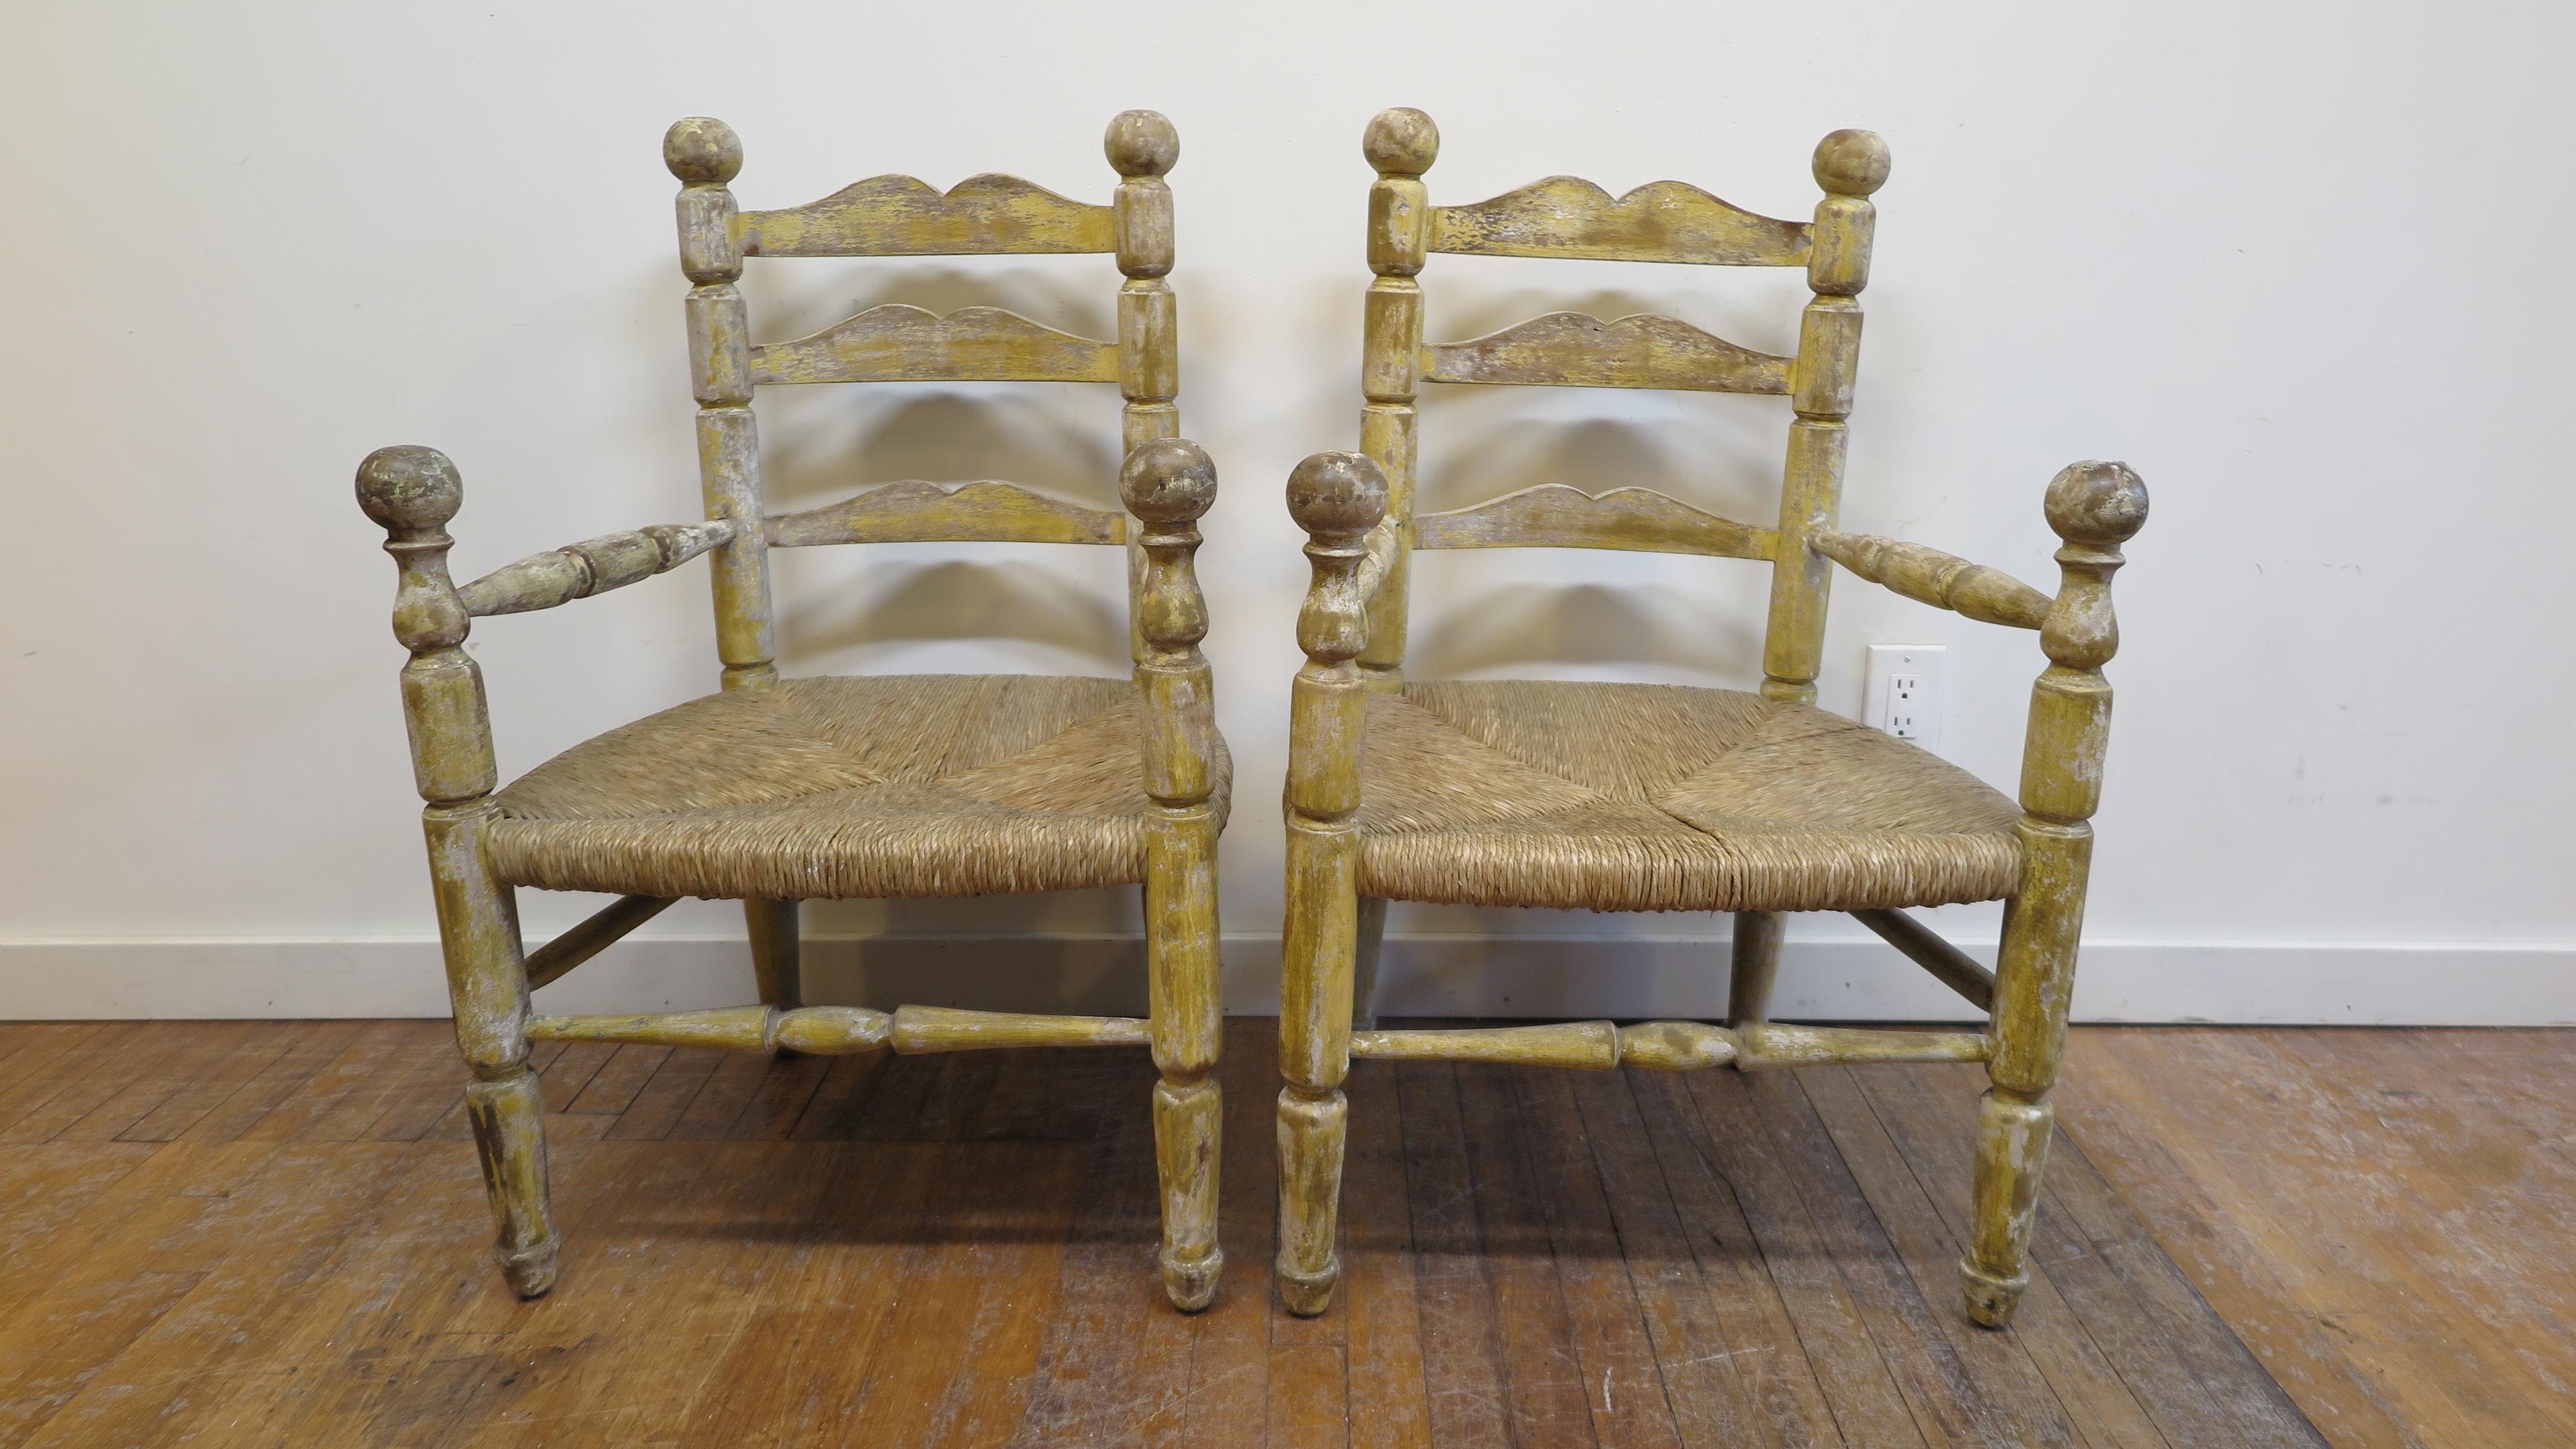 Pair of American rustic rush chairs. American antique country rush chairs with ladder backs and ball hand rests. These chairs have a seat height of 16 inches at 23 wide and 19 deep outer dimensions. Chairs are in good original condition, strong,